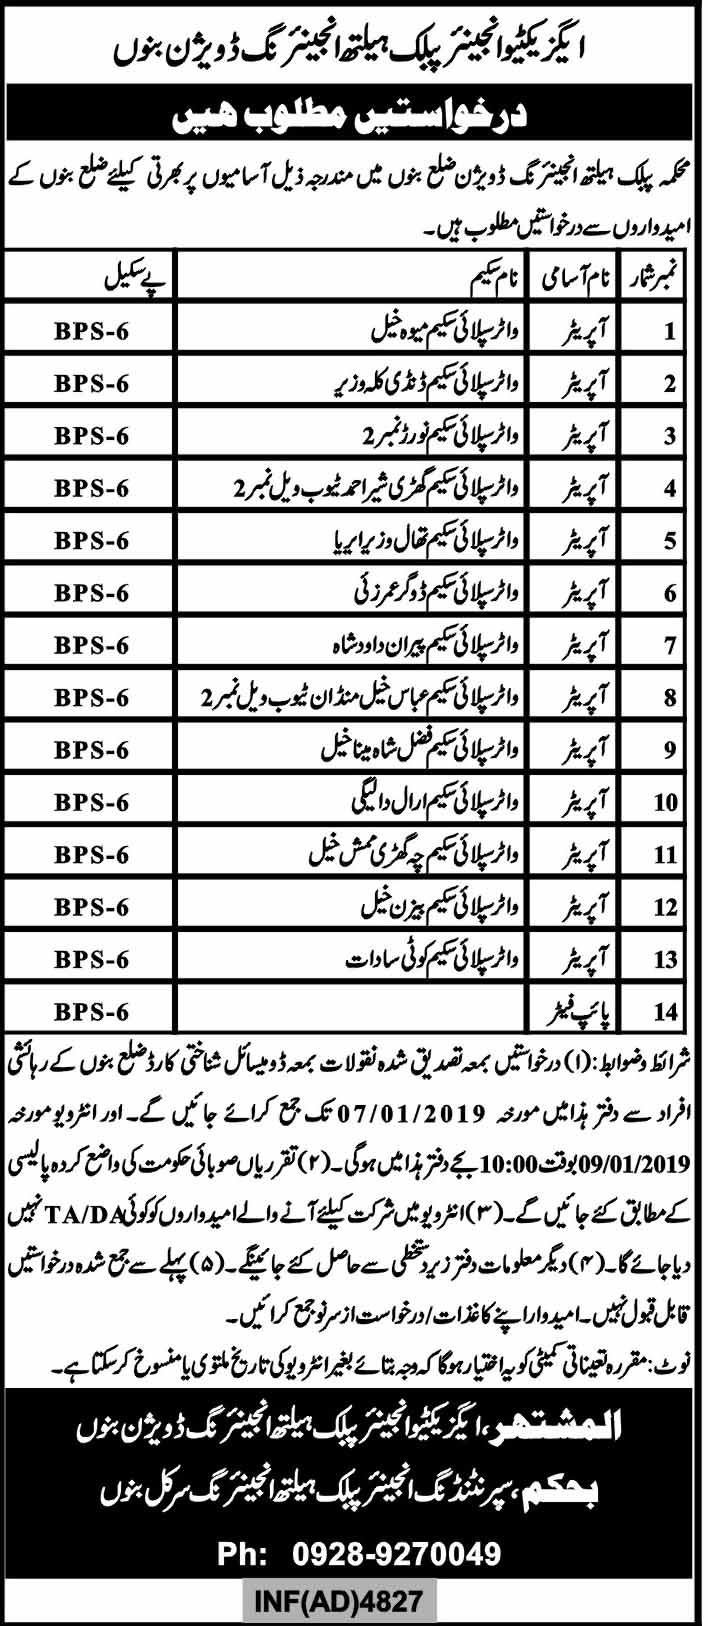 Public Health Engineering Department KP Jobs 2019 for Various Operators / Pipe Fitters Posts in Bannu